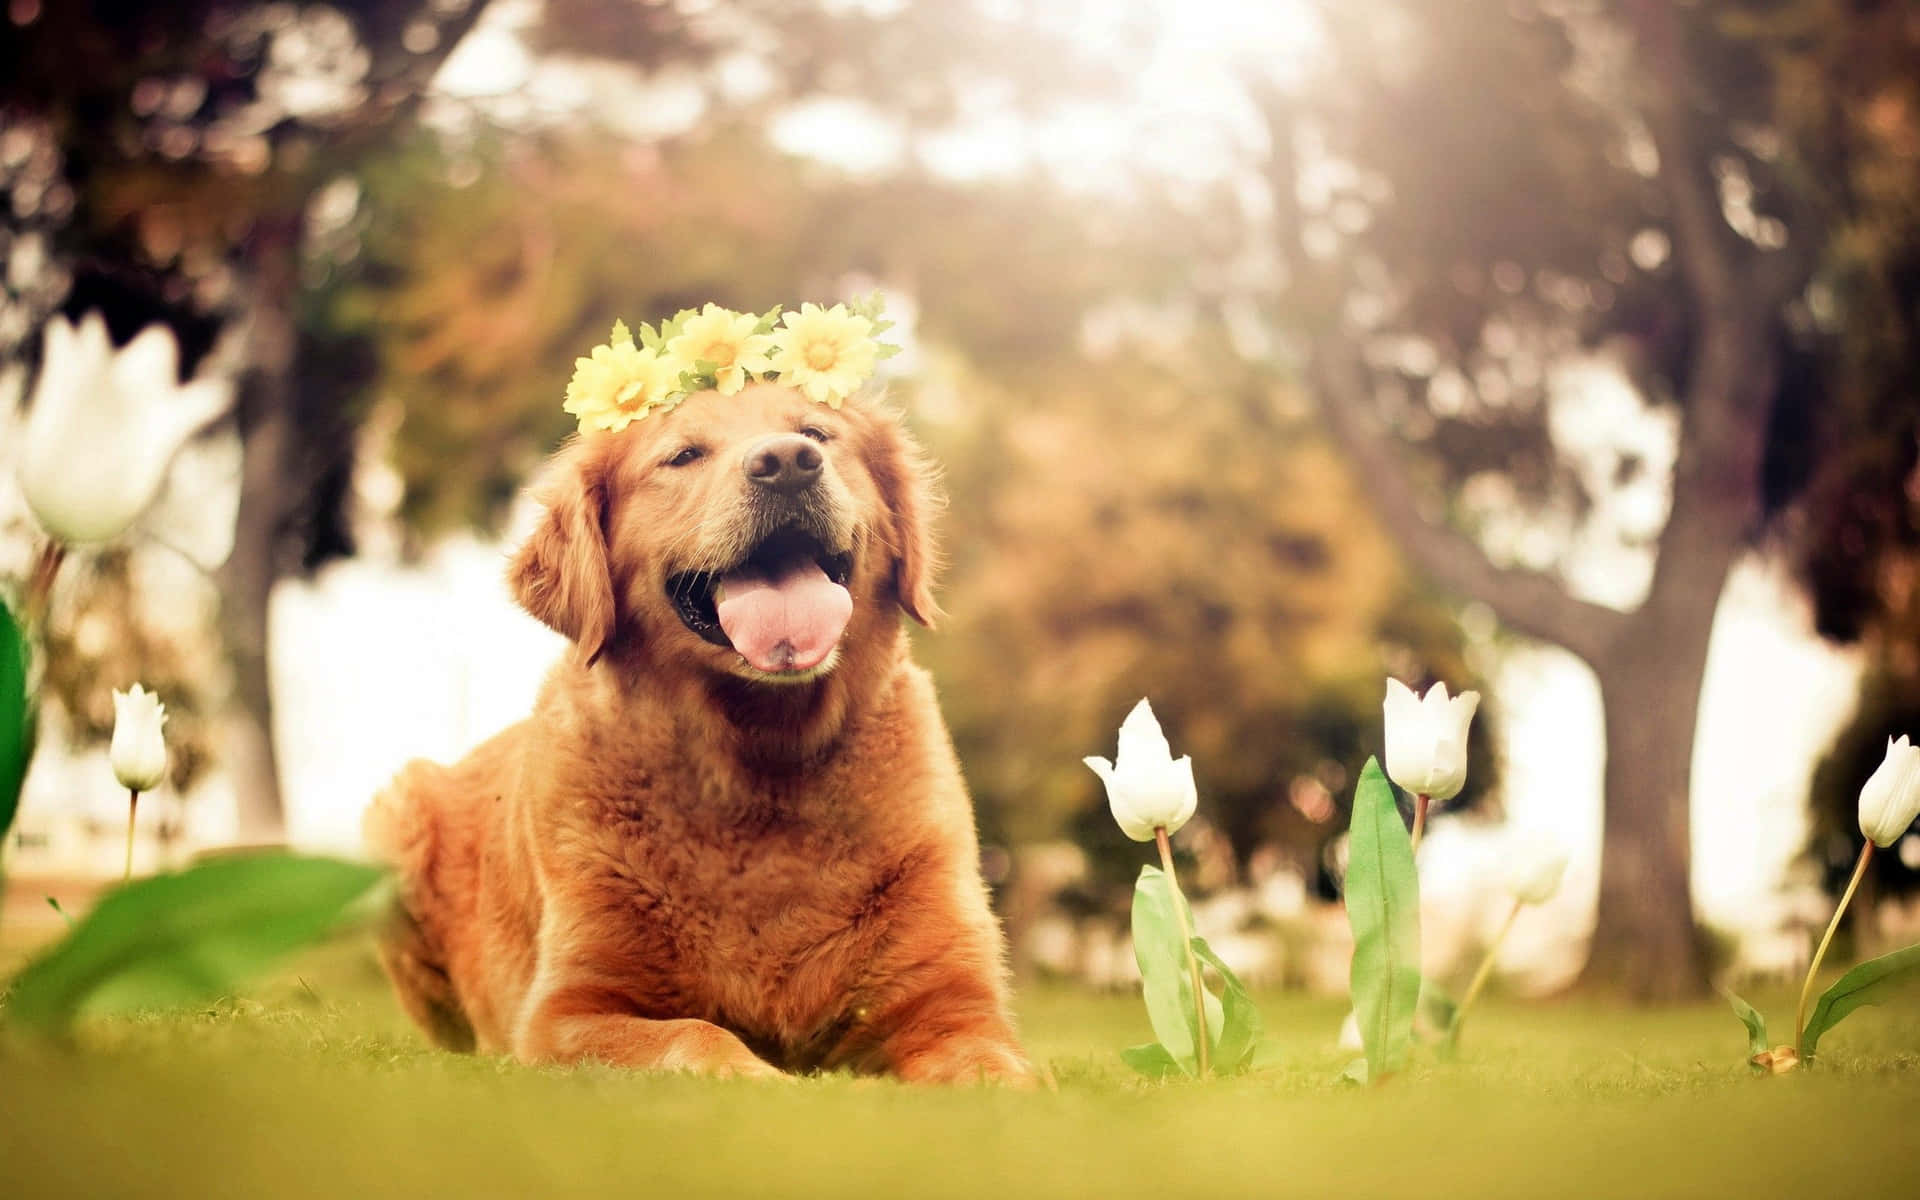 Pooches Are Sweet Companions! Wallpaper